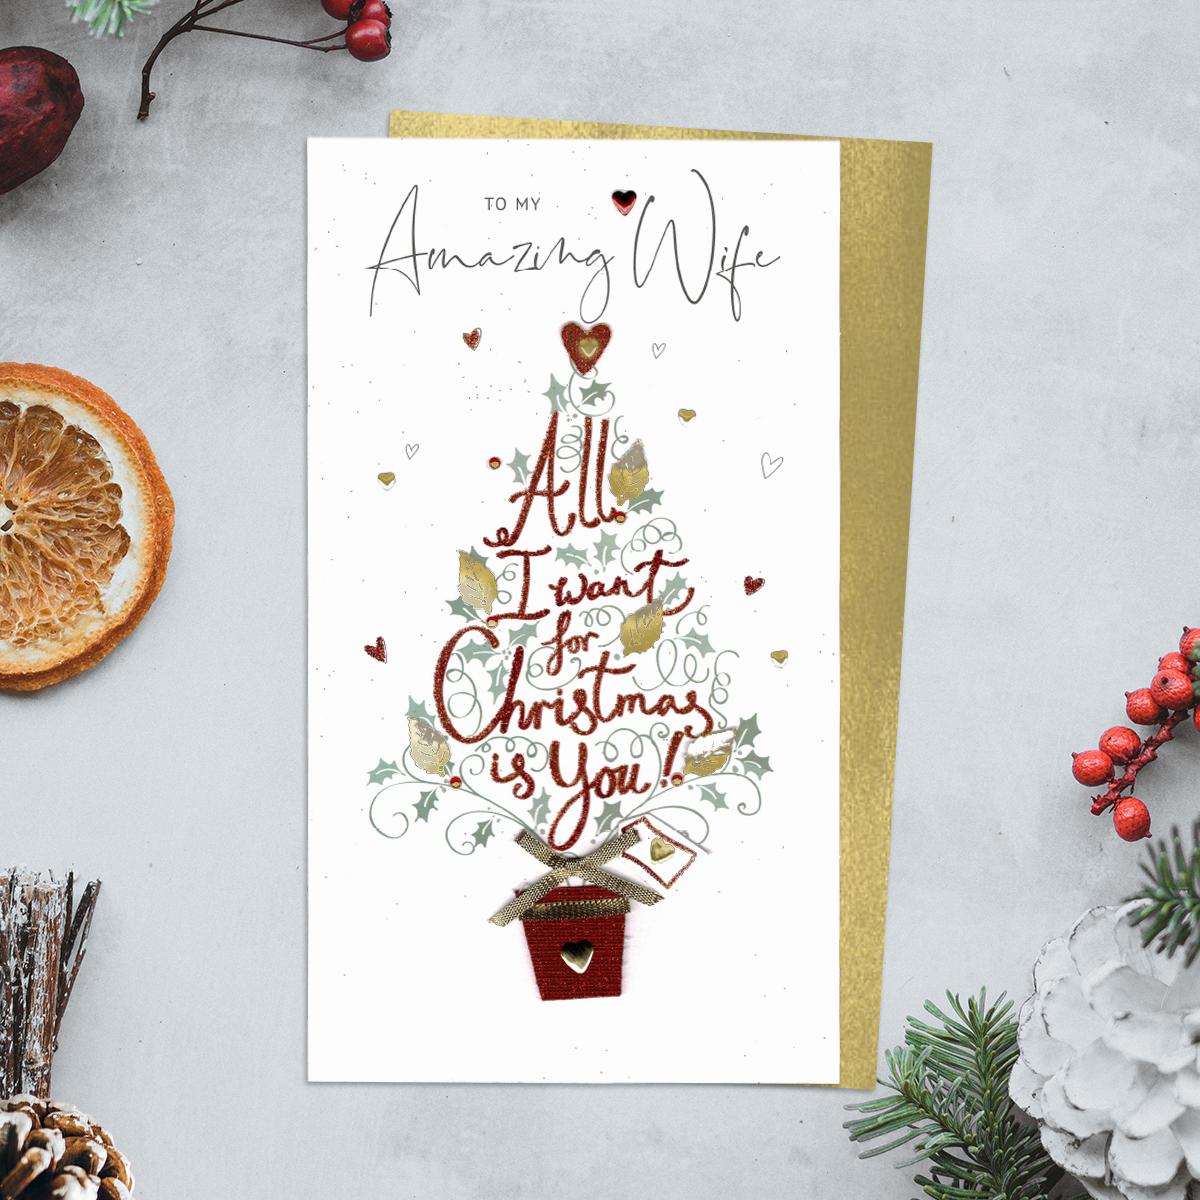 To My Amazing Wife Featuring A Christmas Tree With The Words 'All I Want for Christmas Is You' Running Through It! Hand Finished With Gold Decoupage Leaves And Ribbon And Finished With A Gold Envelope